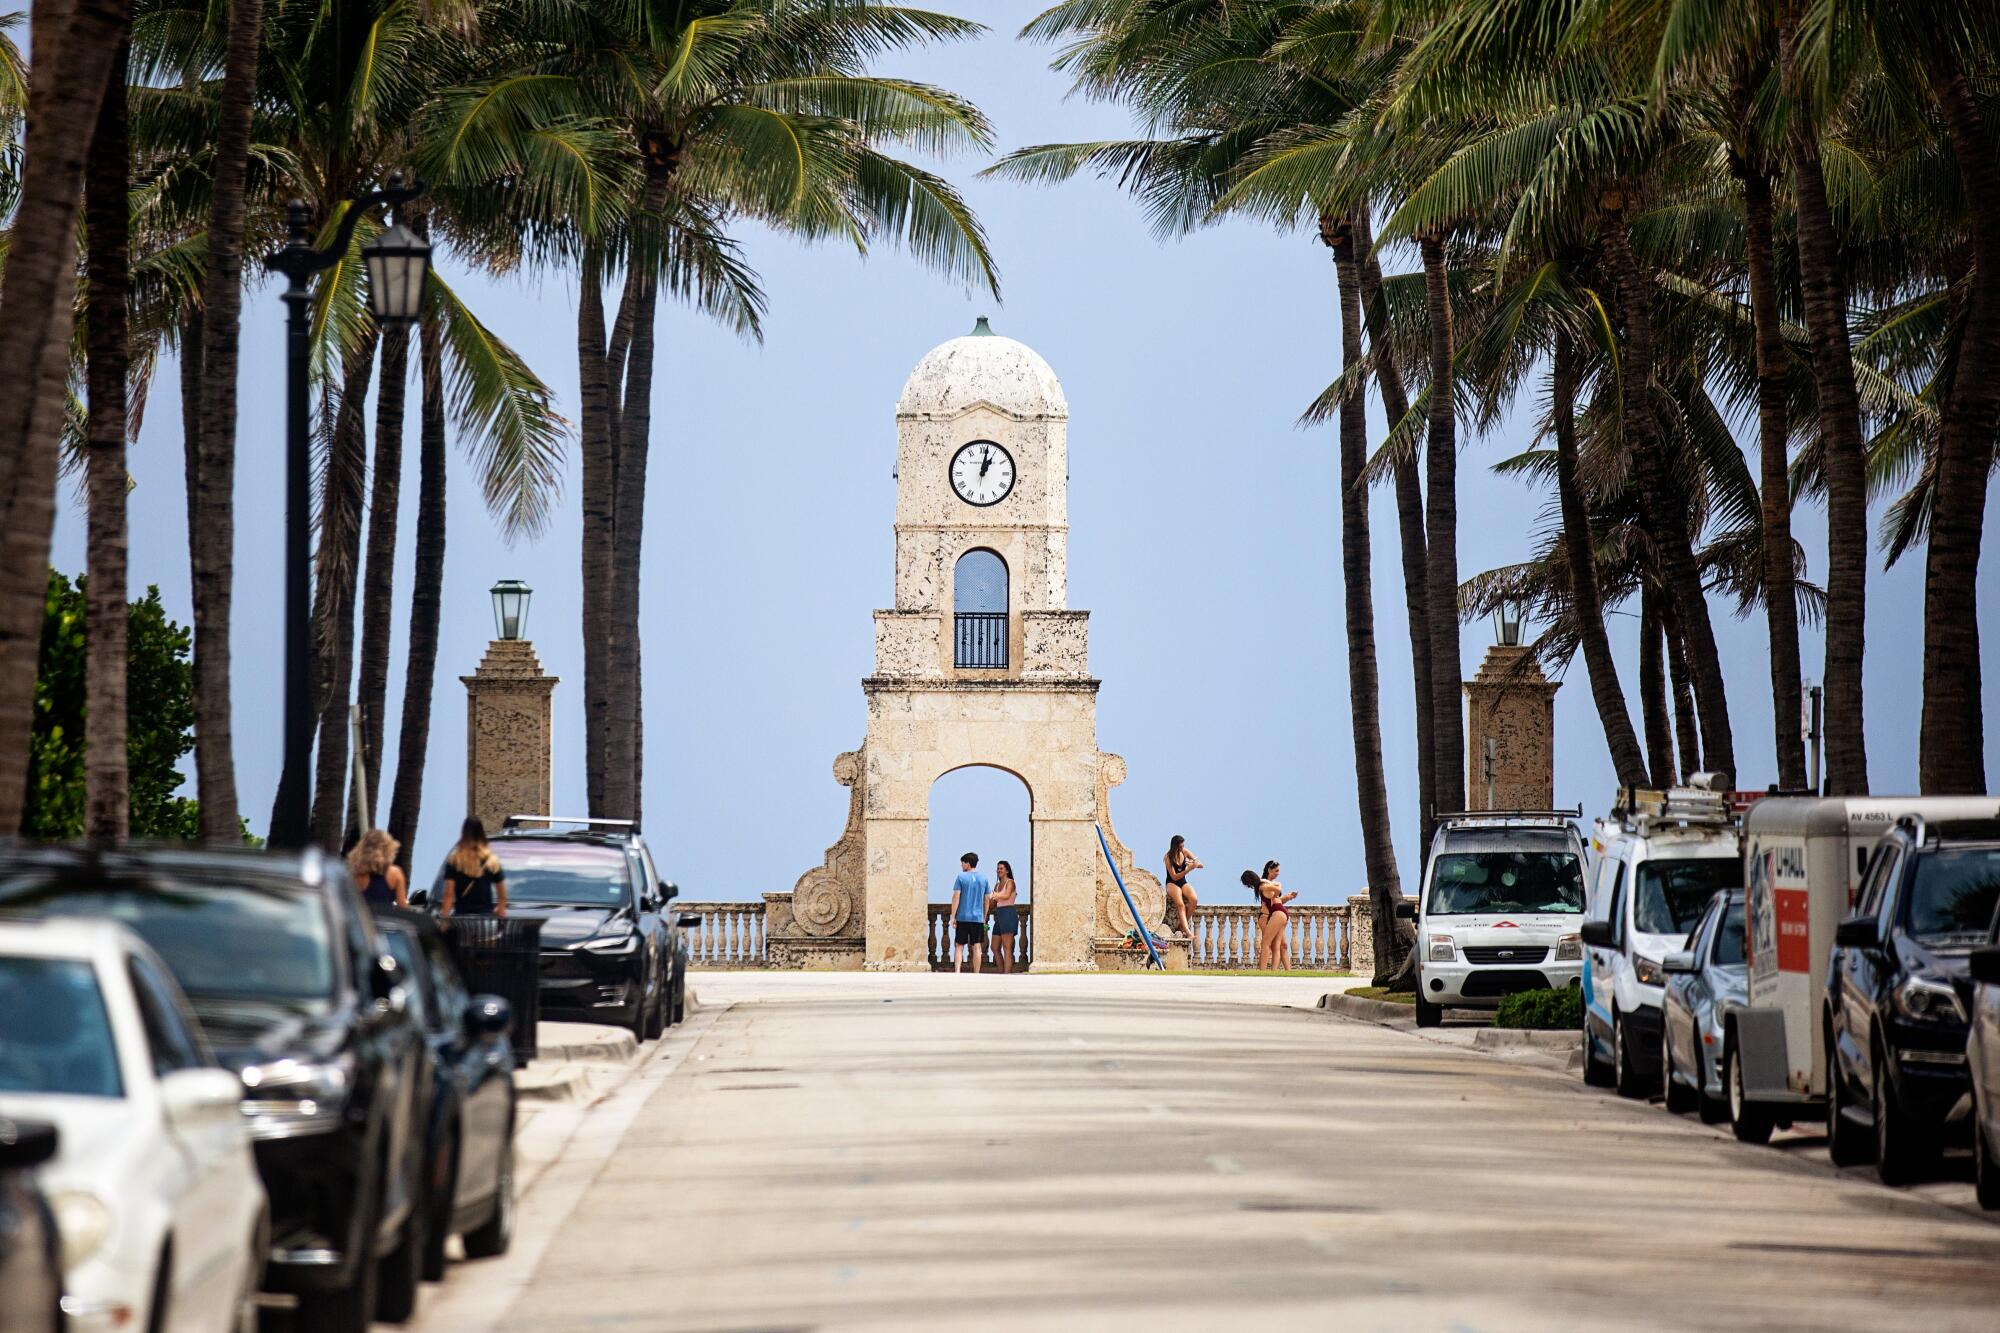 A large clock tower at the end of a palm-tree-lined street